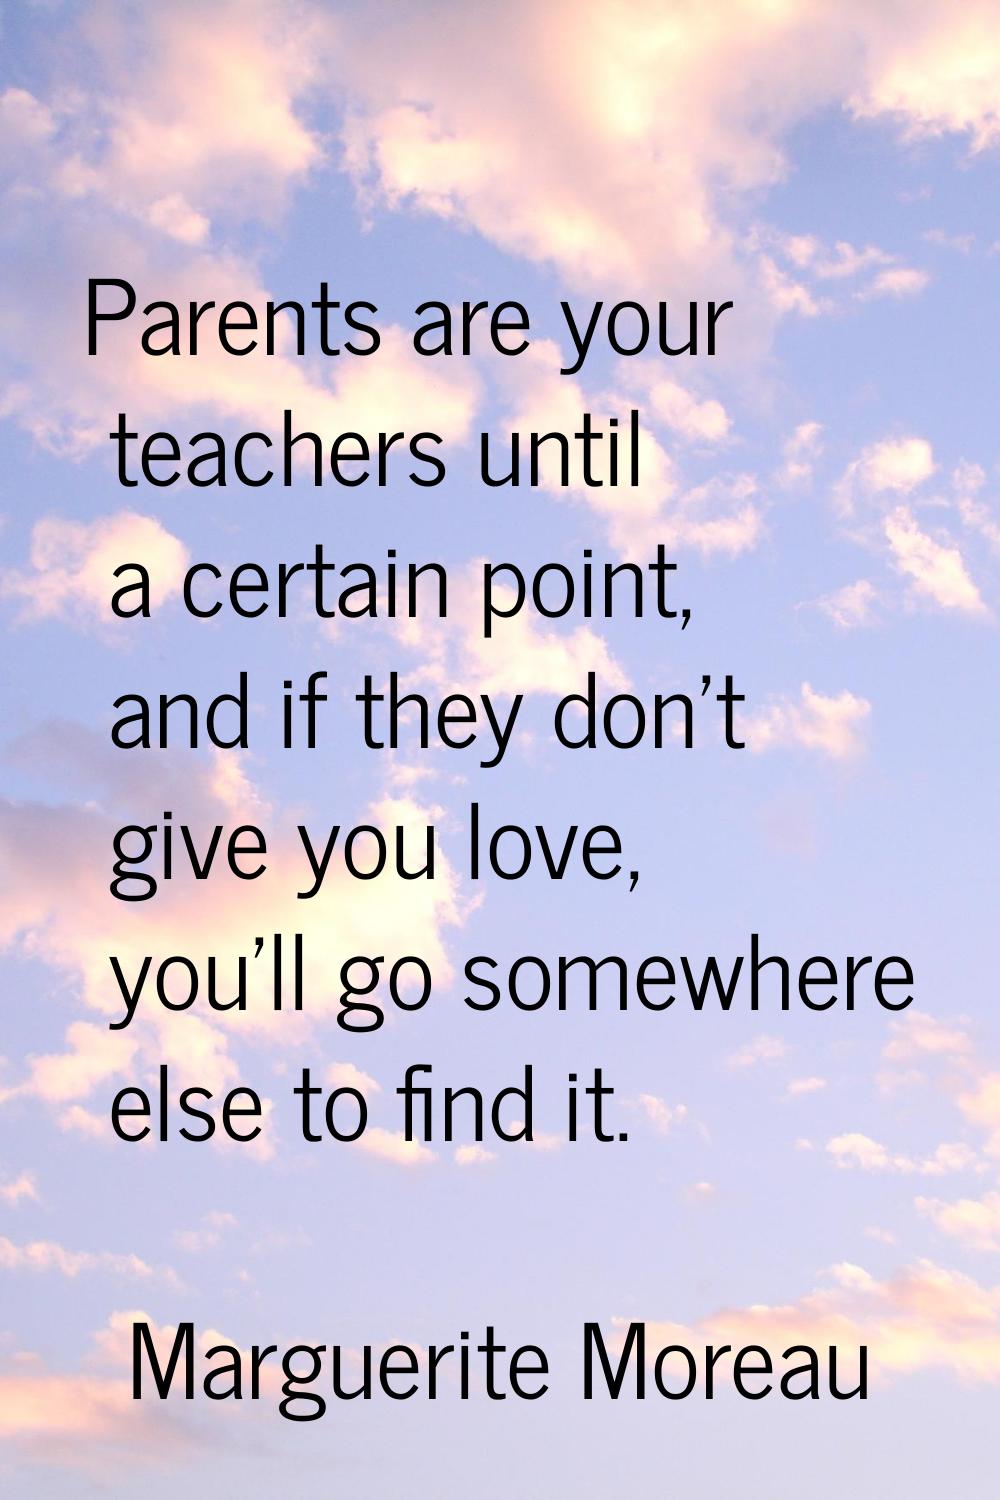 Parents are your teachers until a certain point, and if they don't give you love, you'll go somewhe